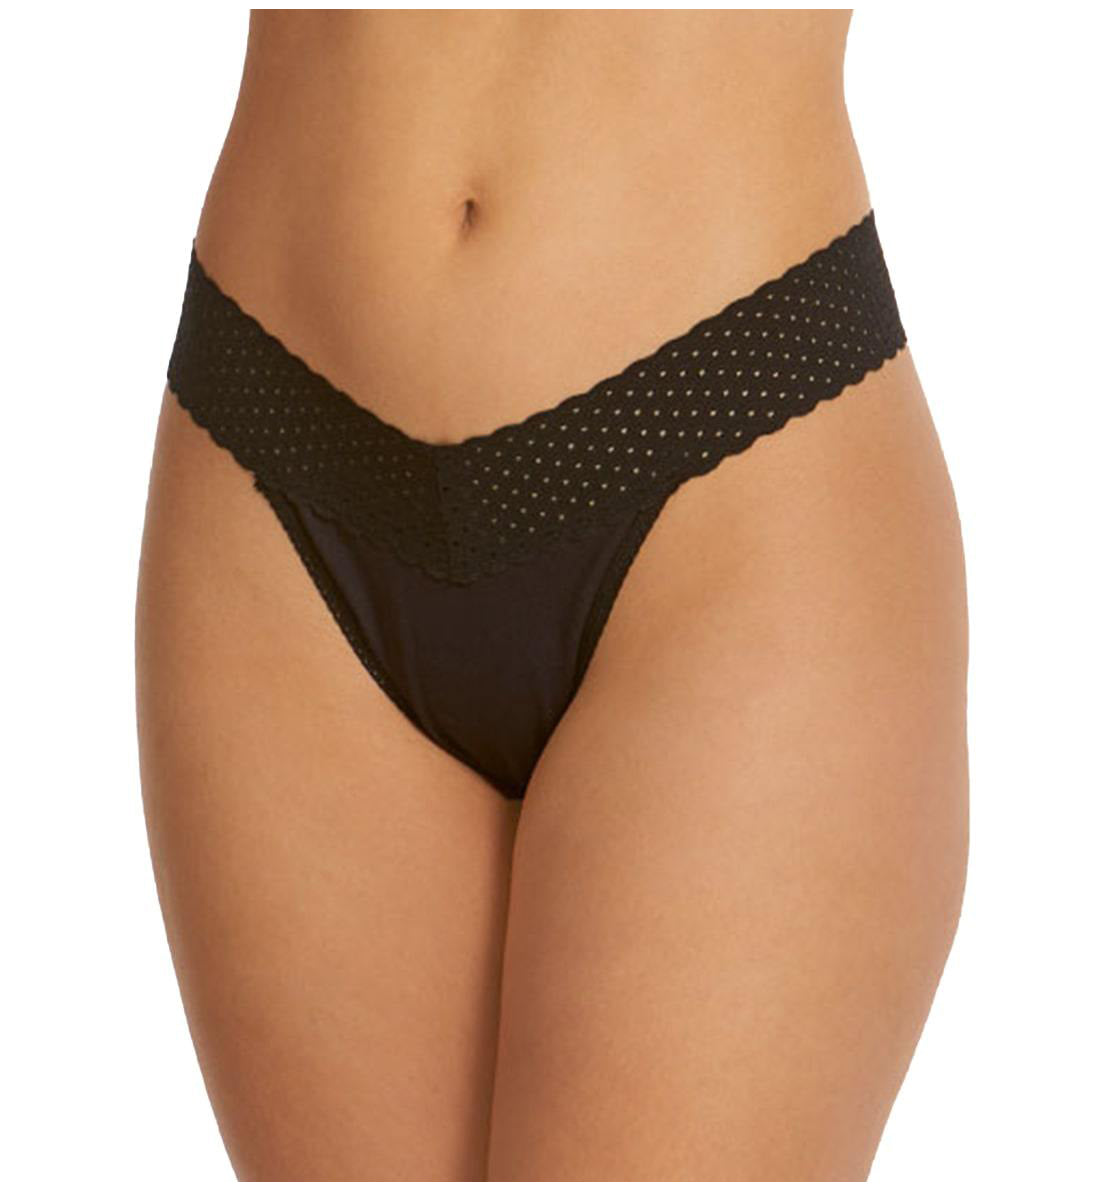 Hanky Panky Organic Cotton Original Rise Thong with Lace (791101),Black - Black,One Size